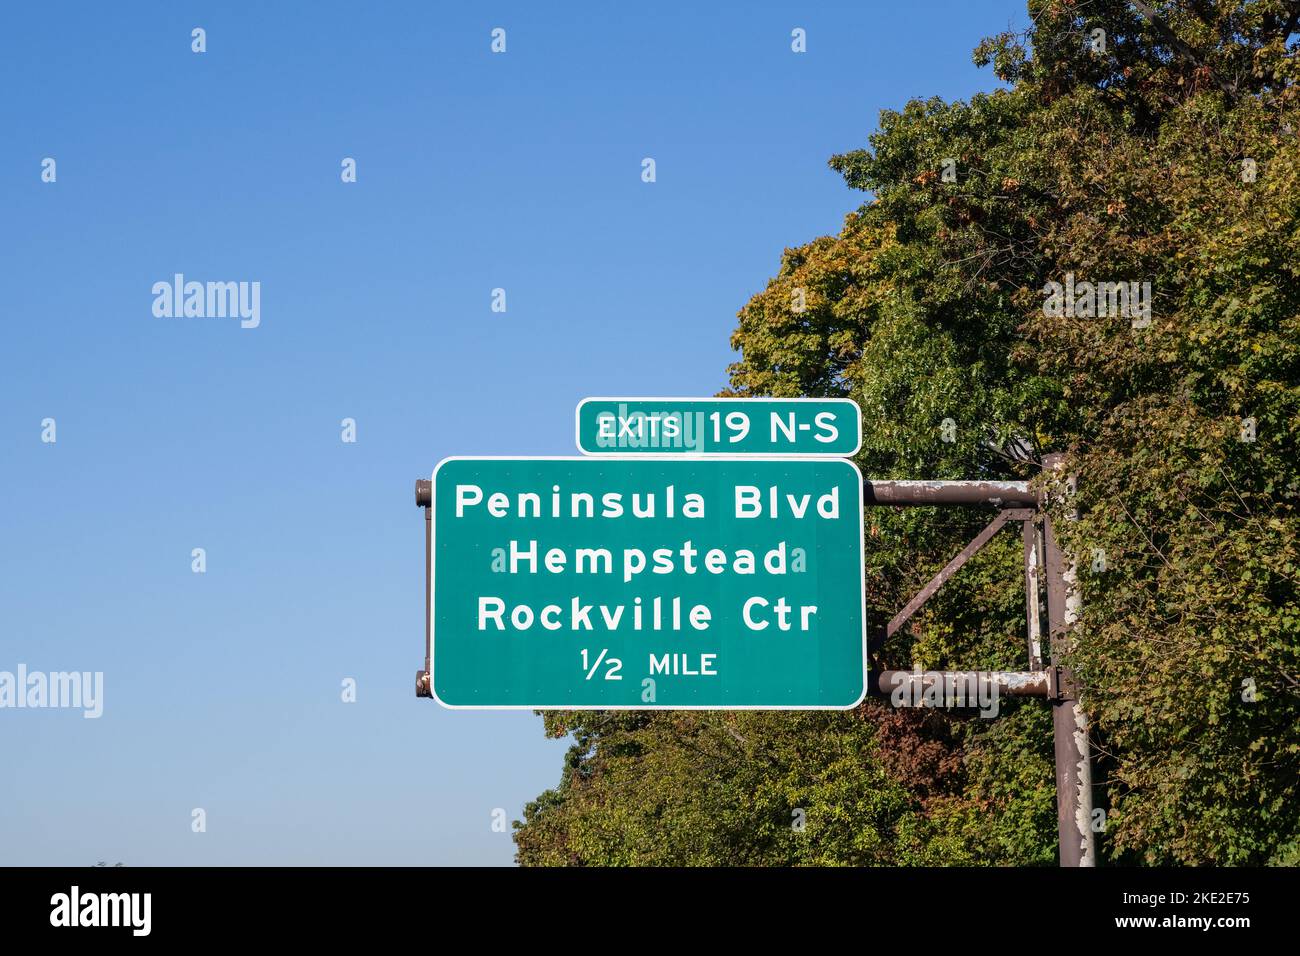 exit sign on the Southern State Parkway on Long Island, New York for 19 N-S Peninsula Blvd, Hempstead, Rockville Ctr Stock Photo